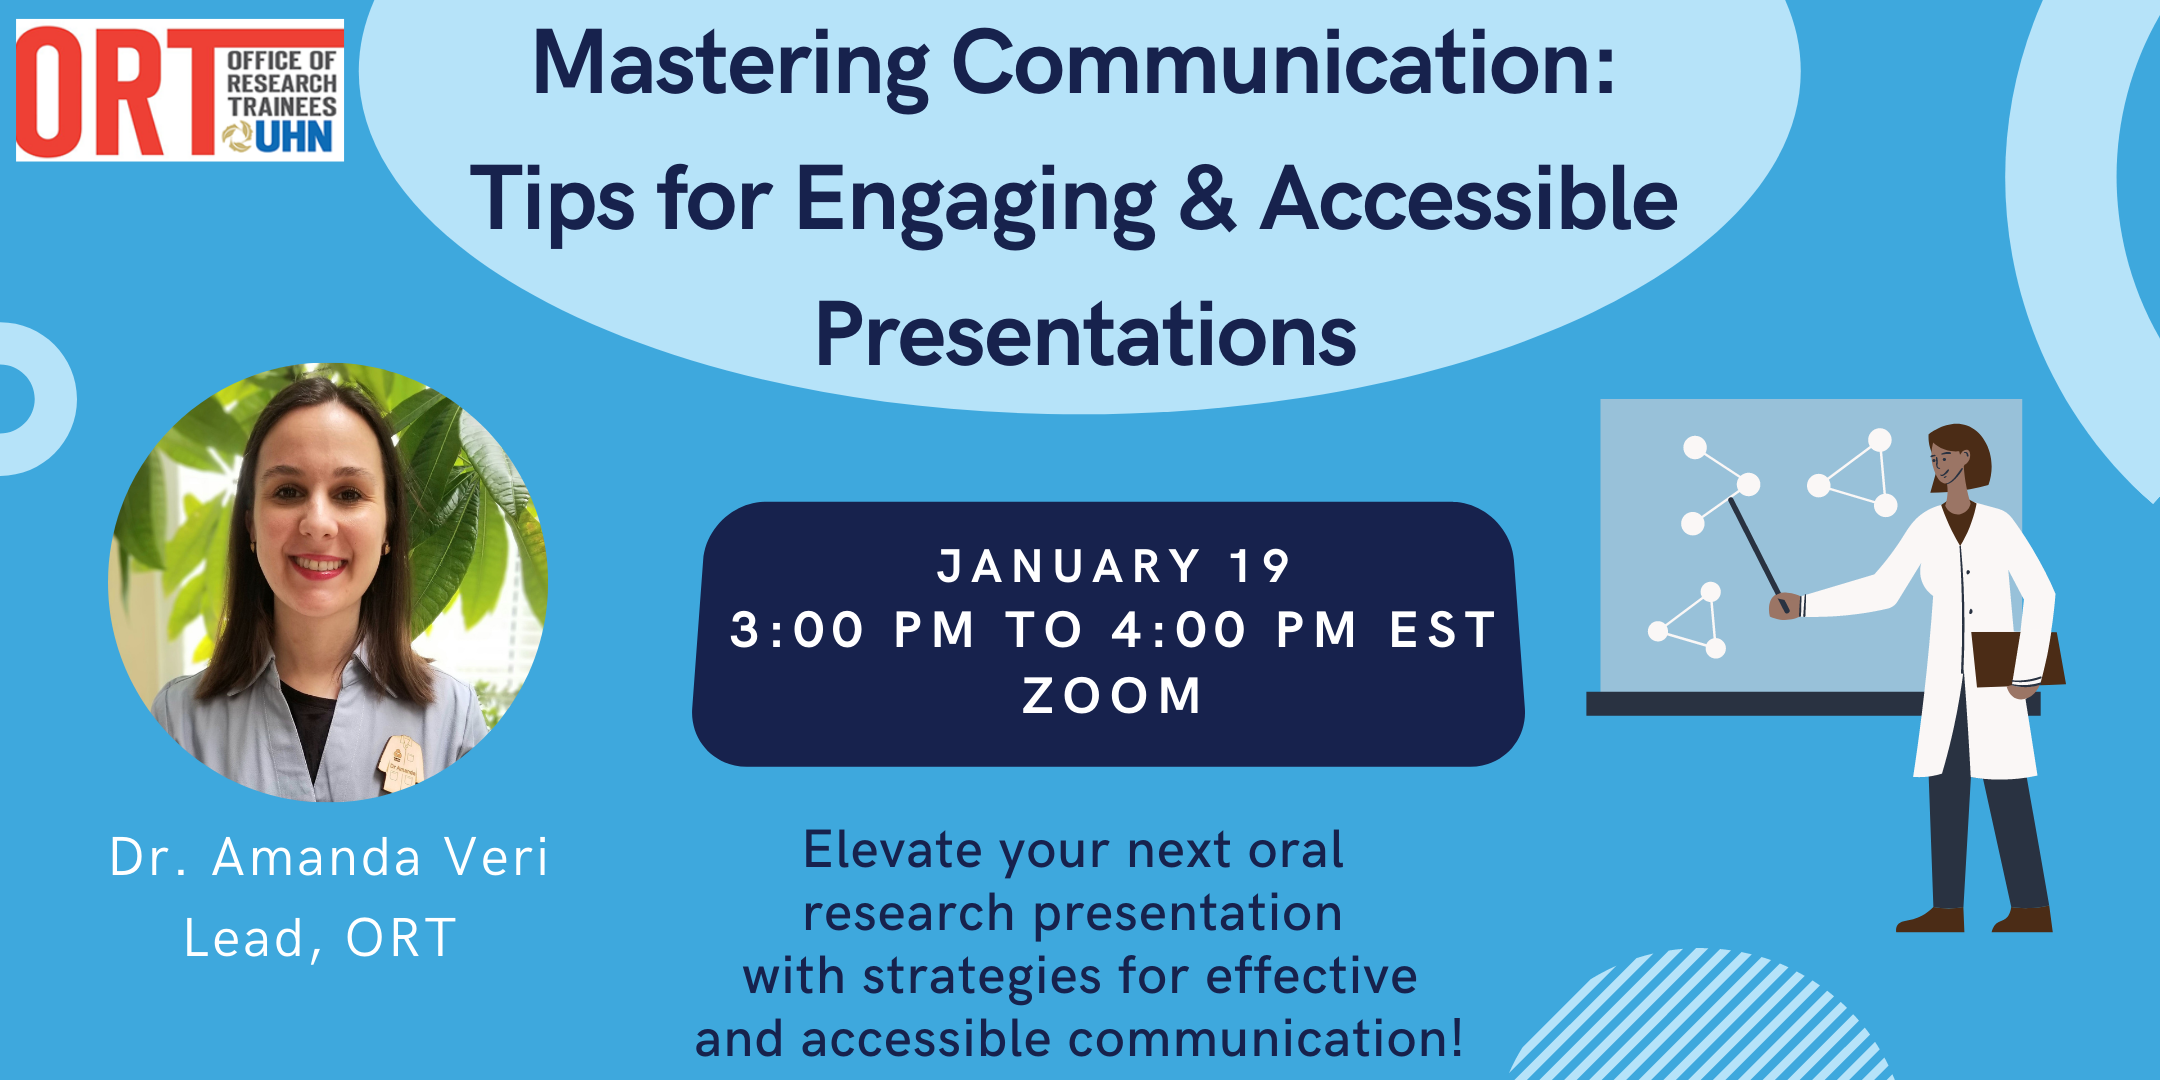 A graphic for the ORT's event "Mastering Communication: Tips for Engaging & Accessible Presentations". The graphic has a photo of guest speaker, Dr. Amanda Veri on the left and a graphic of a female scientist presenting research on the left. In the centre is the event date of January 19 from 3-4 pm EST over Zoom. Underneath, text explains that the event will help participants elevate their research presentations with strategies for effective and accessible communication.